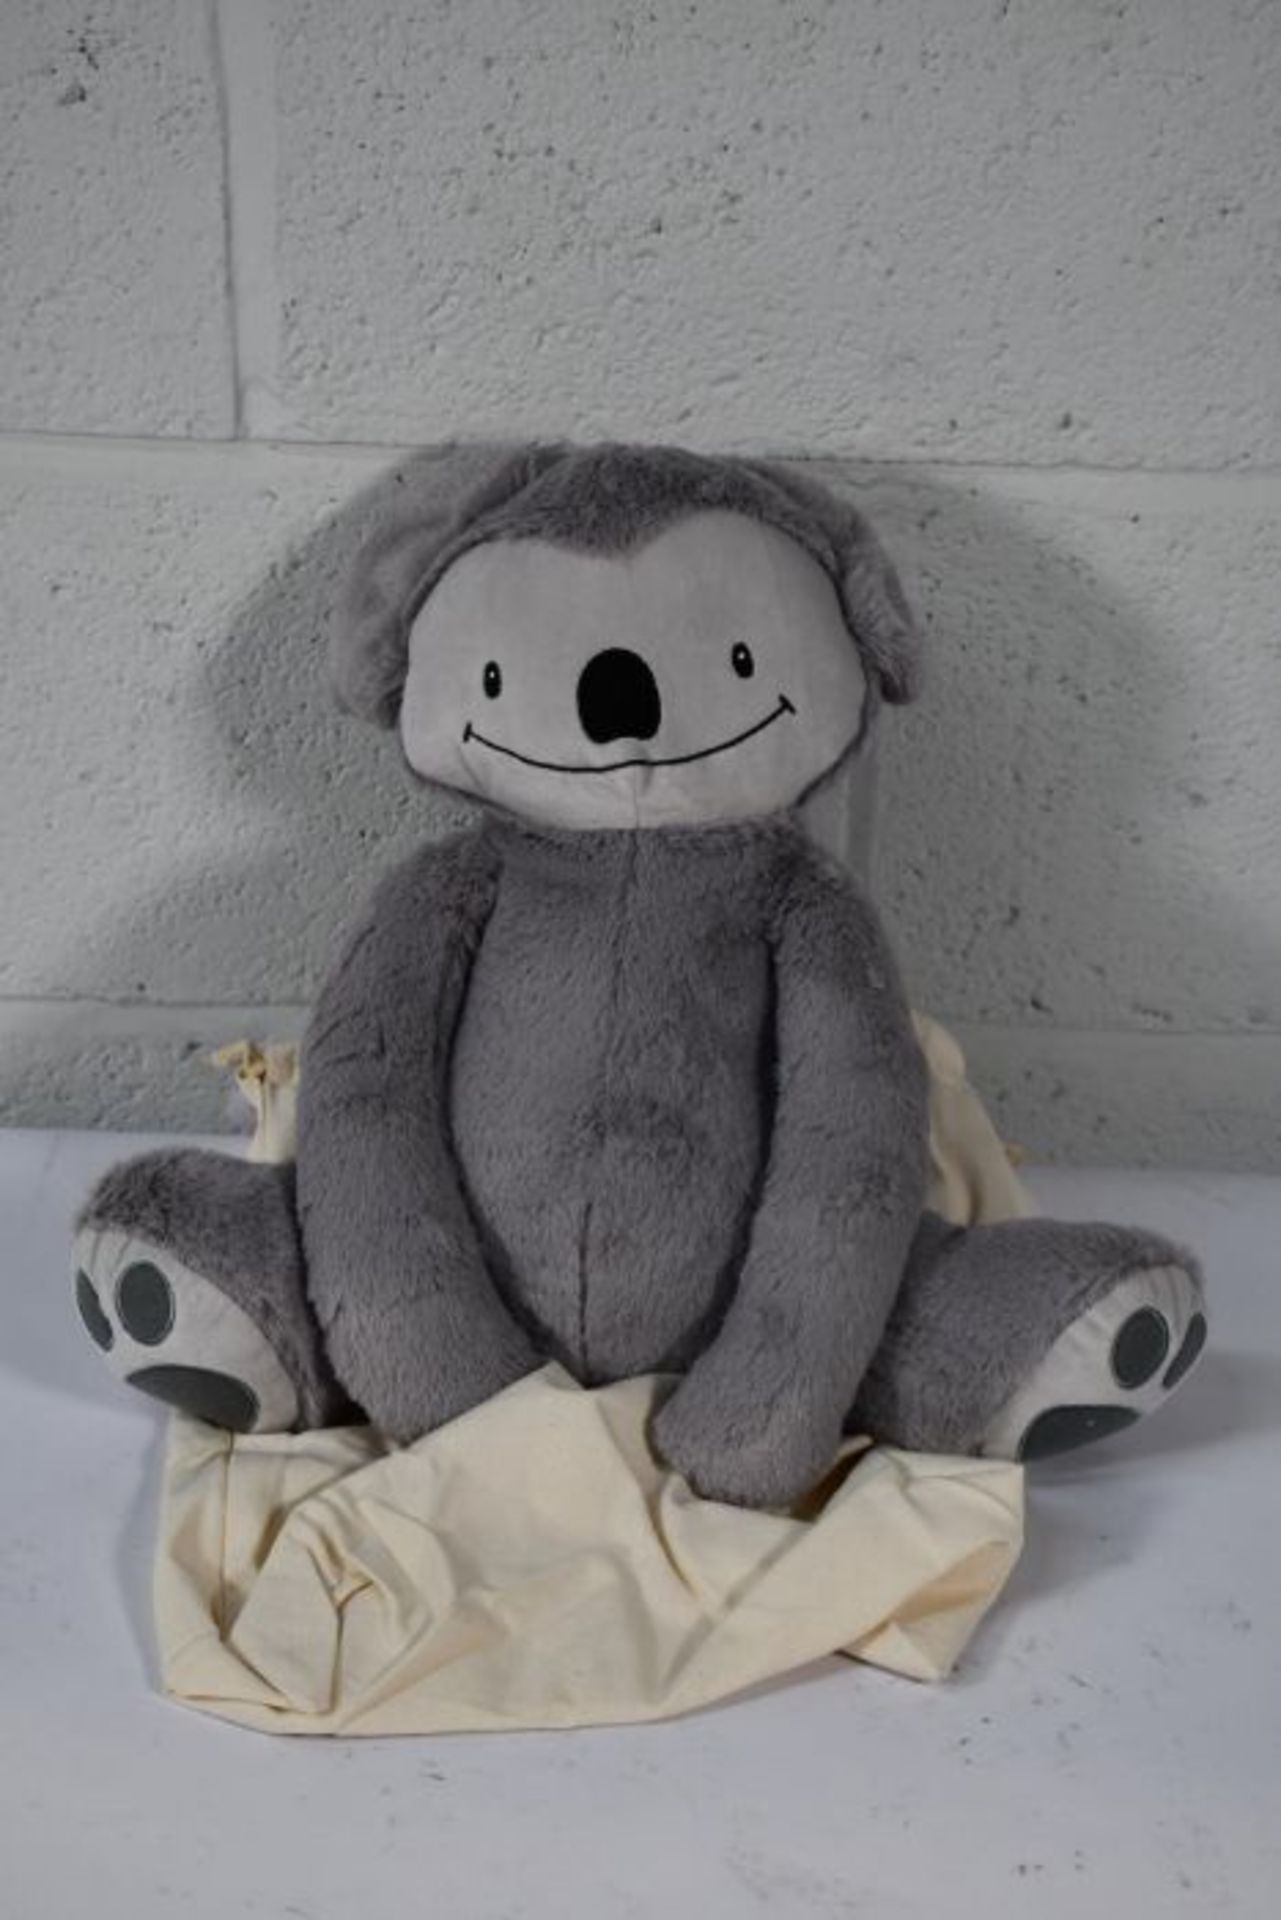 An as new Eco friendly soft 4lb custom weighted plush animal toy for Autism and anxiety